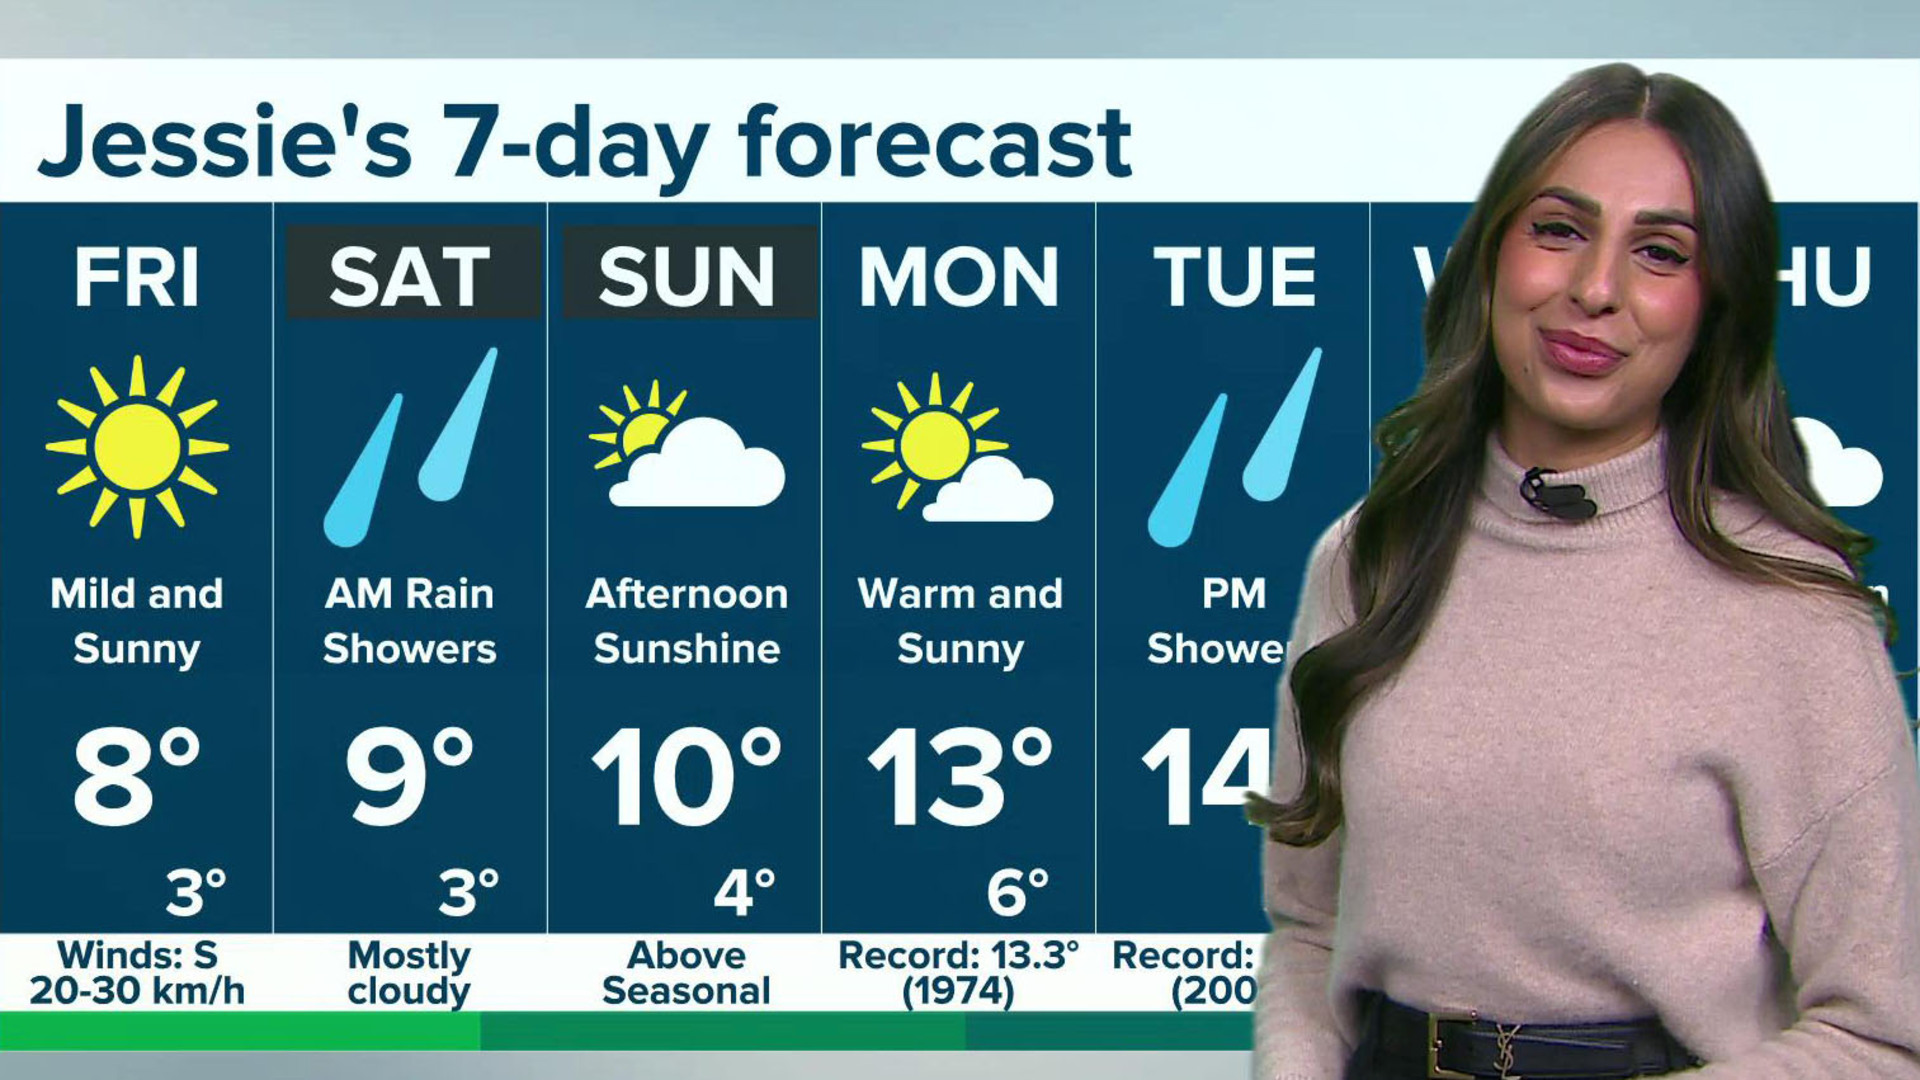 Spring-like weather returning to the GTA